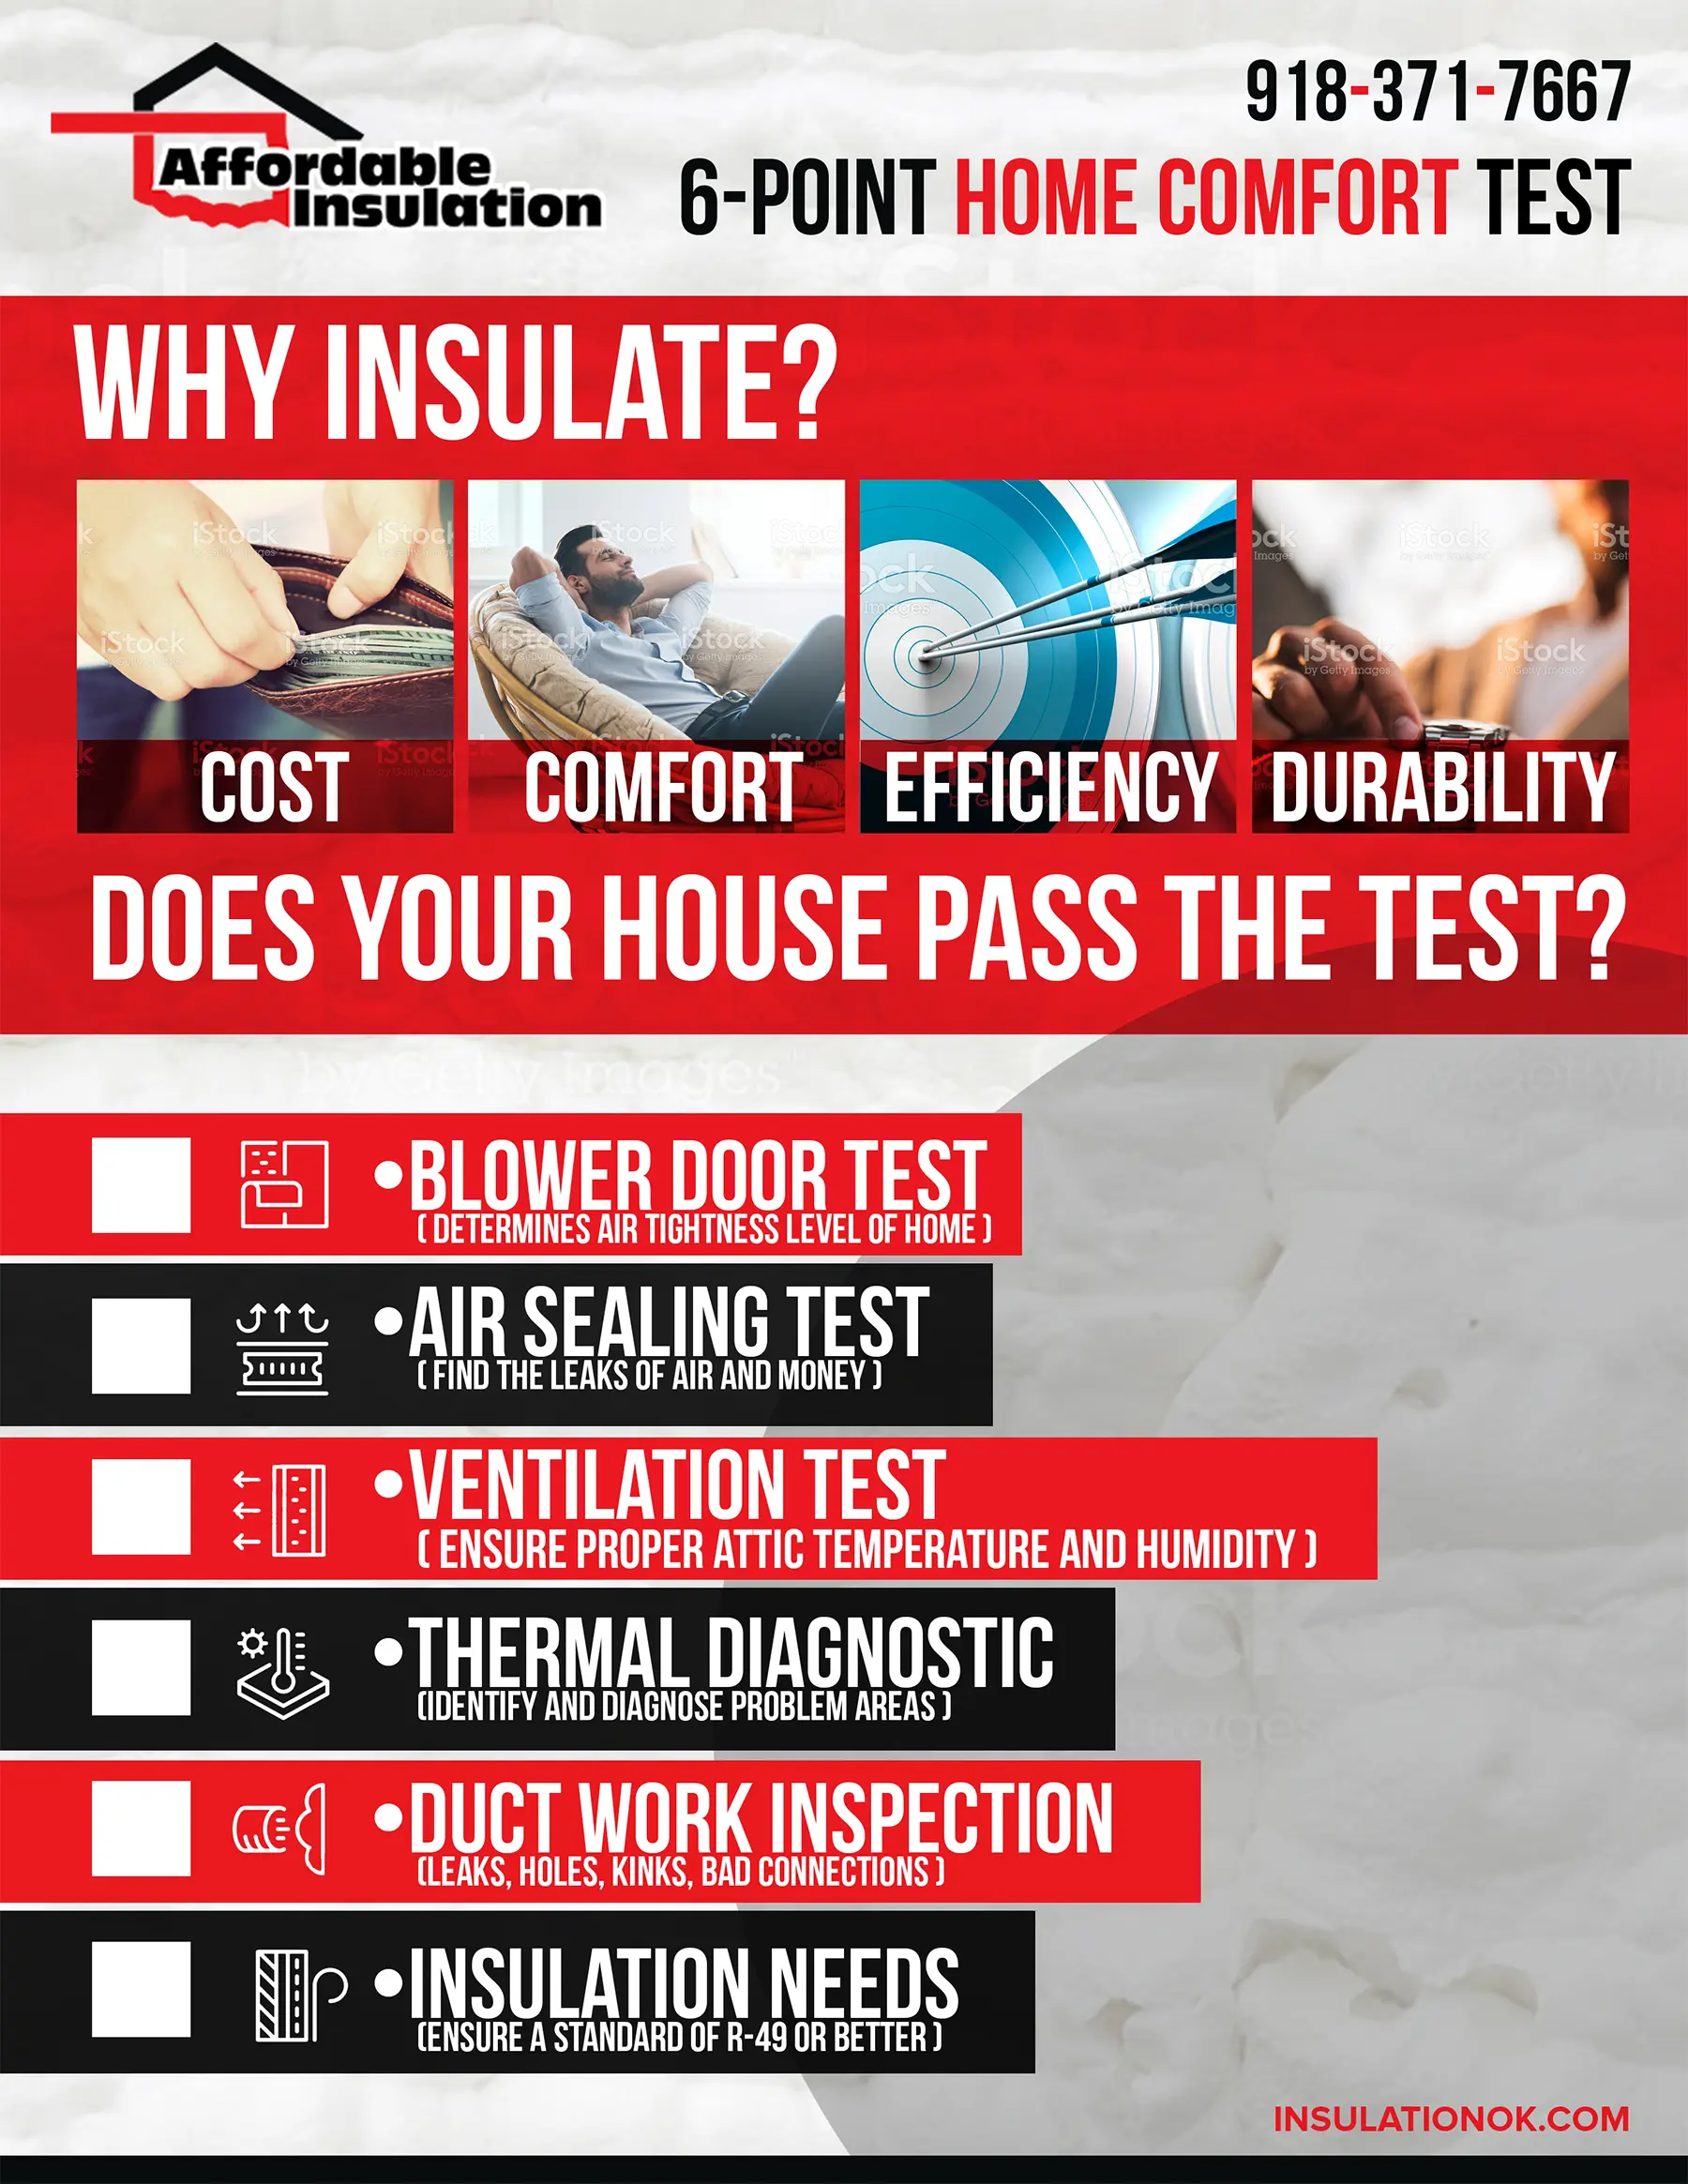 Home Performance Test from Affordable Insulation